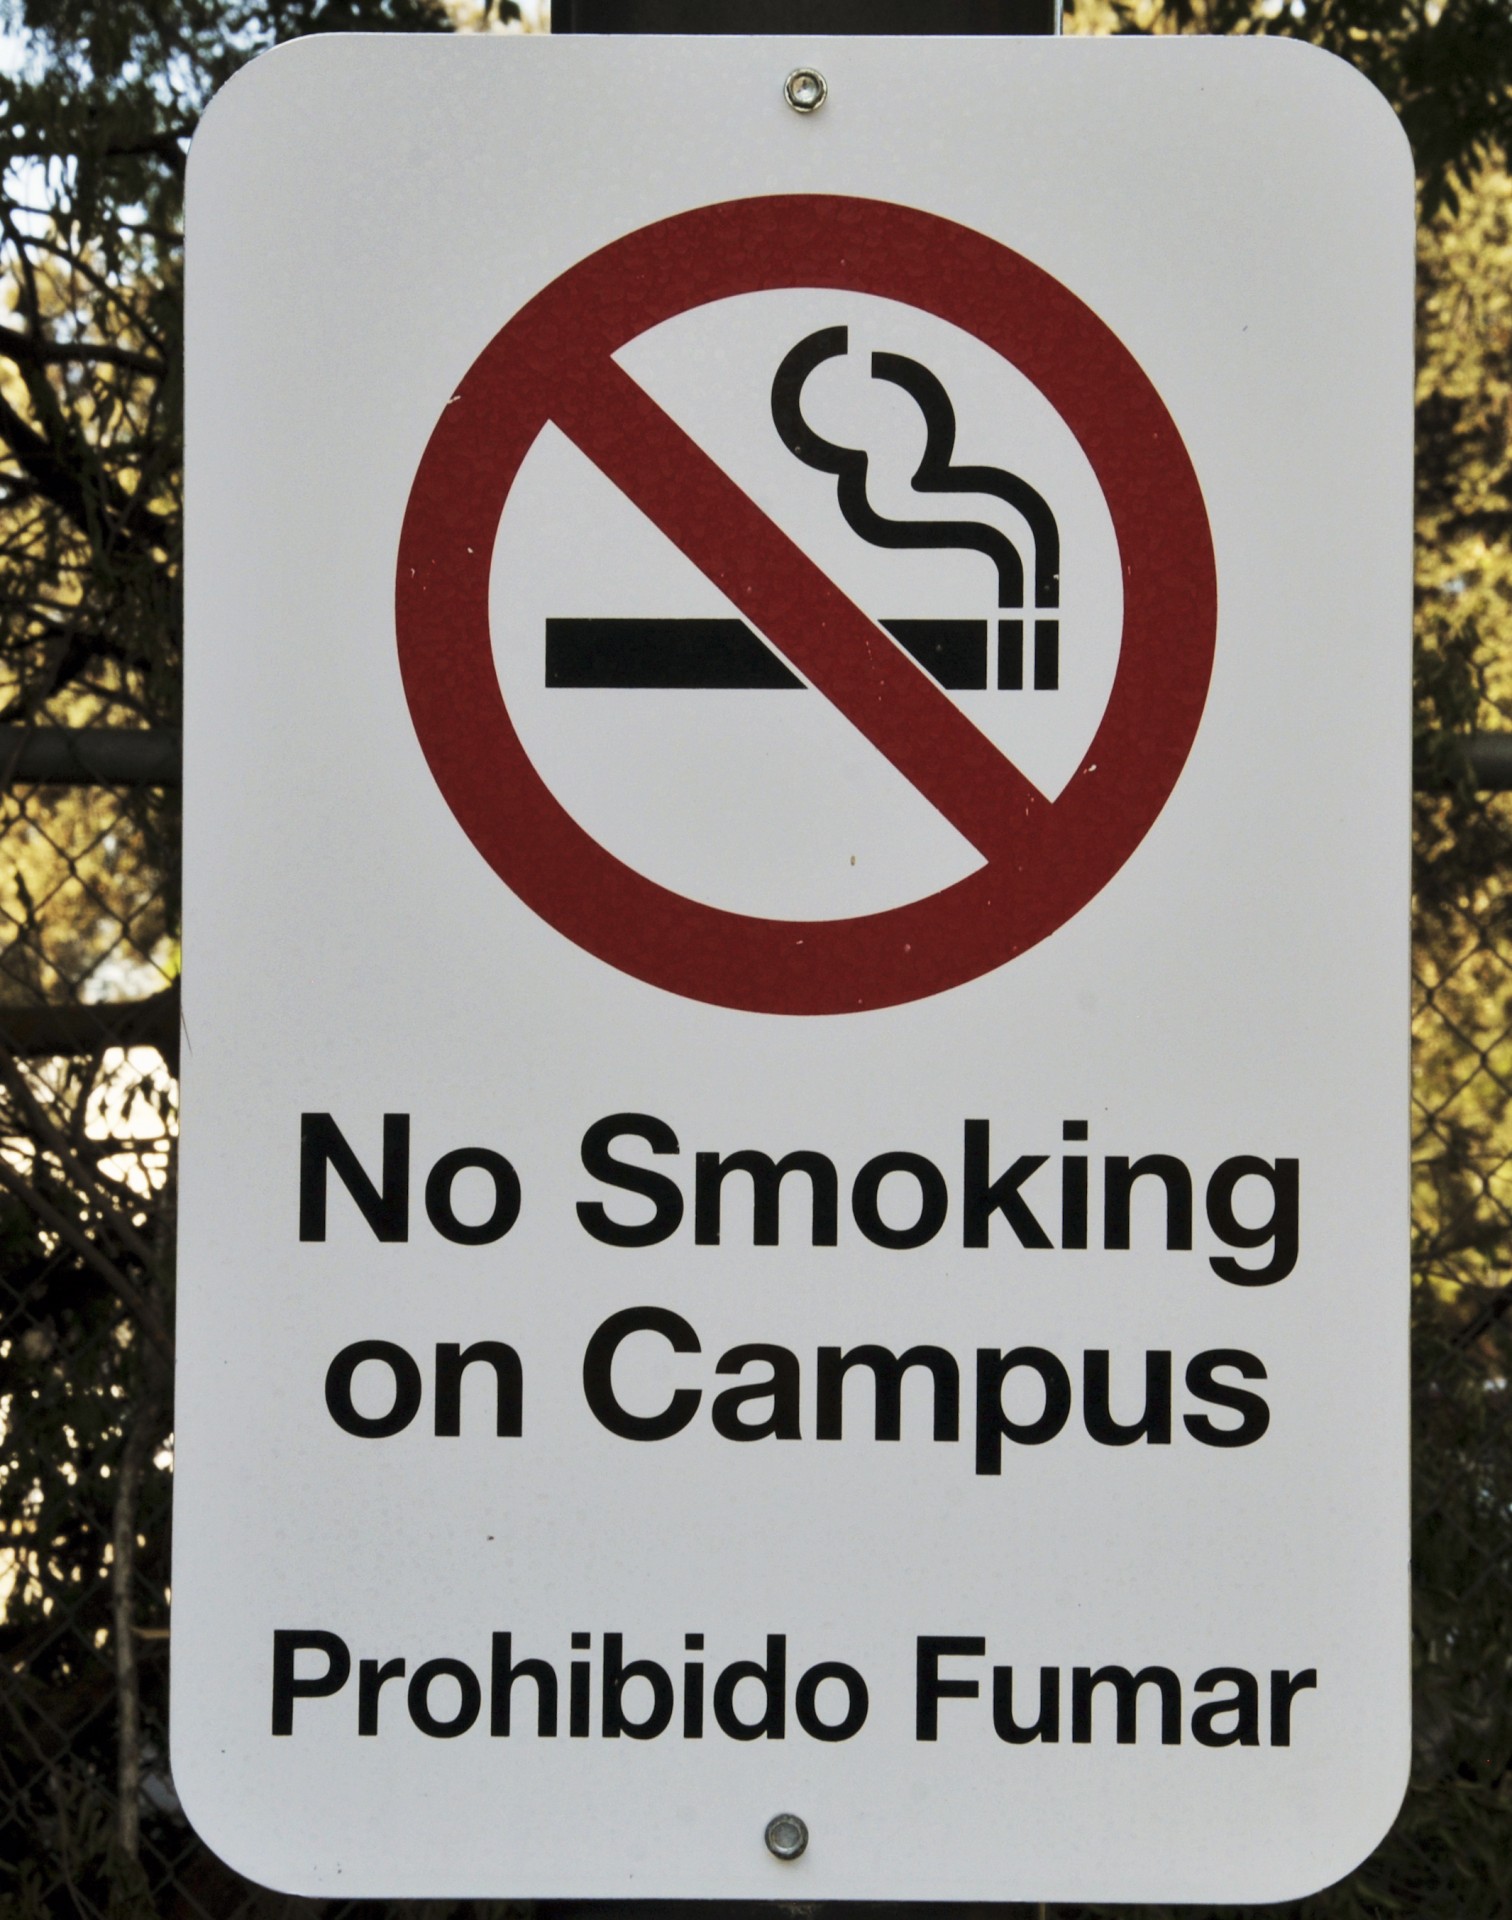 No smoking on campus sign. Photo courtesy of publicdomainpictures.net.